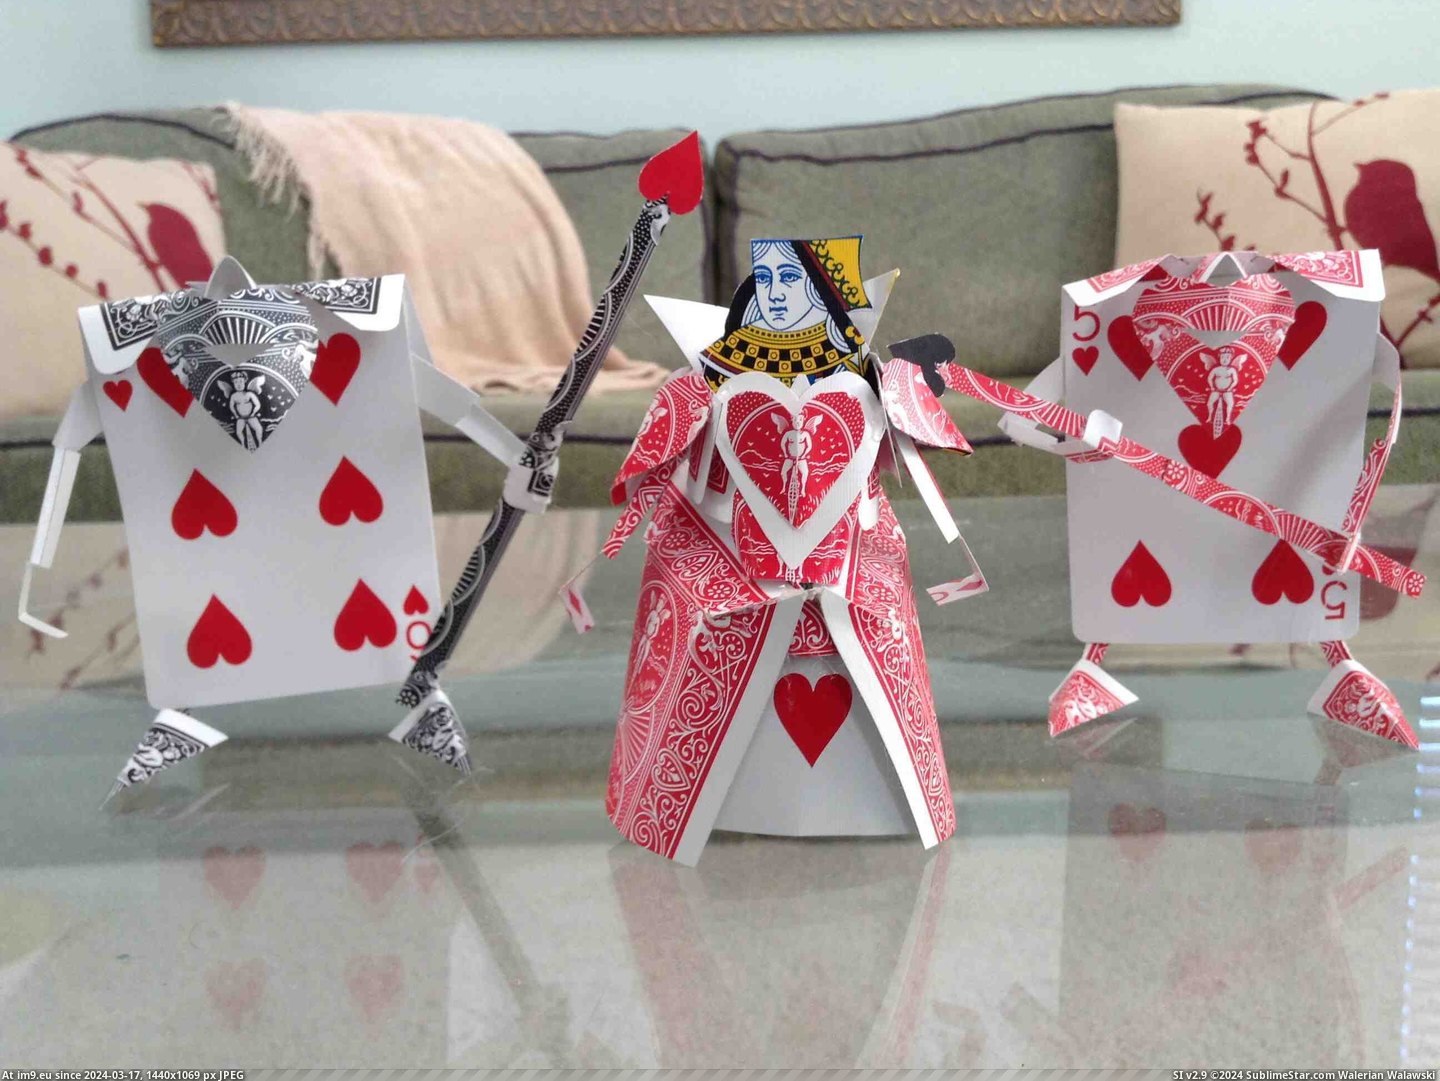 #Red #Heart #Queen #Army #Wonderland #Card #Alice #Cards [Pics] Red Card Heart Army & Queen of Heart (Alice in Wonderland) I made out of cards Pic. (Image of album My r/PICS favs))